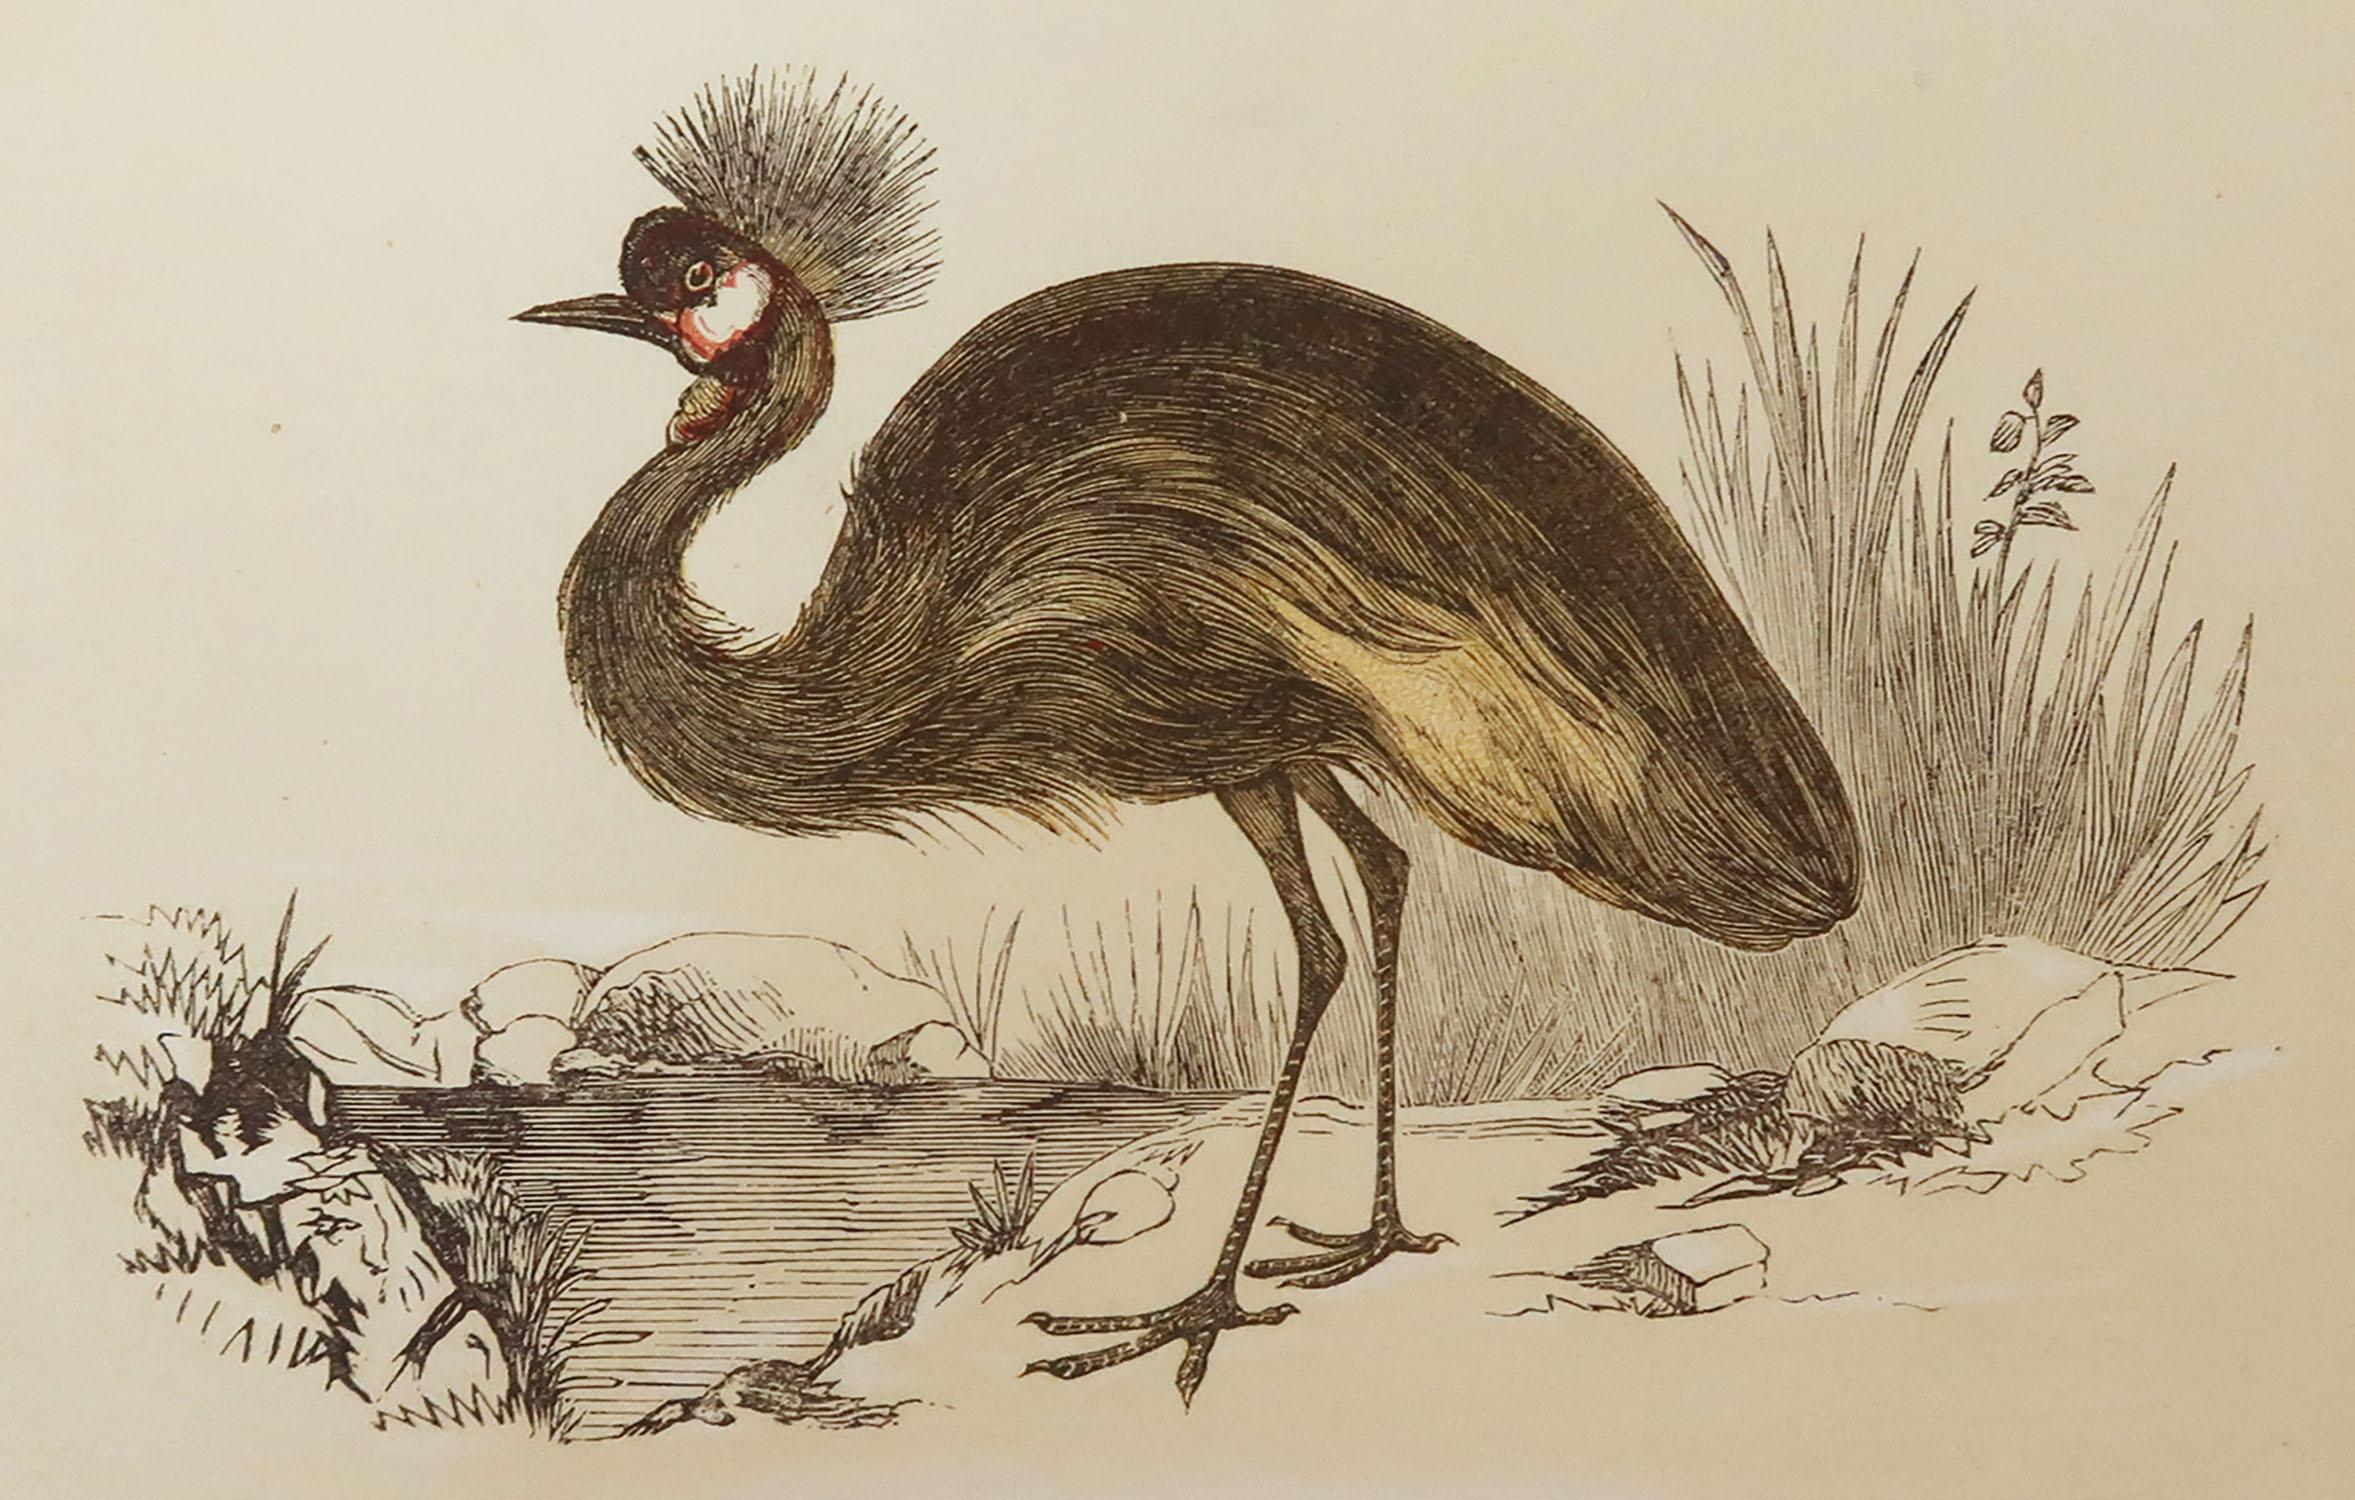 Great image of a Balearic crane

Unframed. It gives you the option of perhaps making a set up using your own choice of frames.

Lithograph with original color.

Published by Tallis circa 1850

Crudely inscribed title has been erased at the